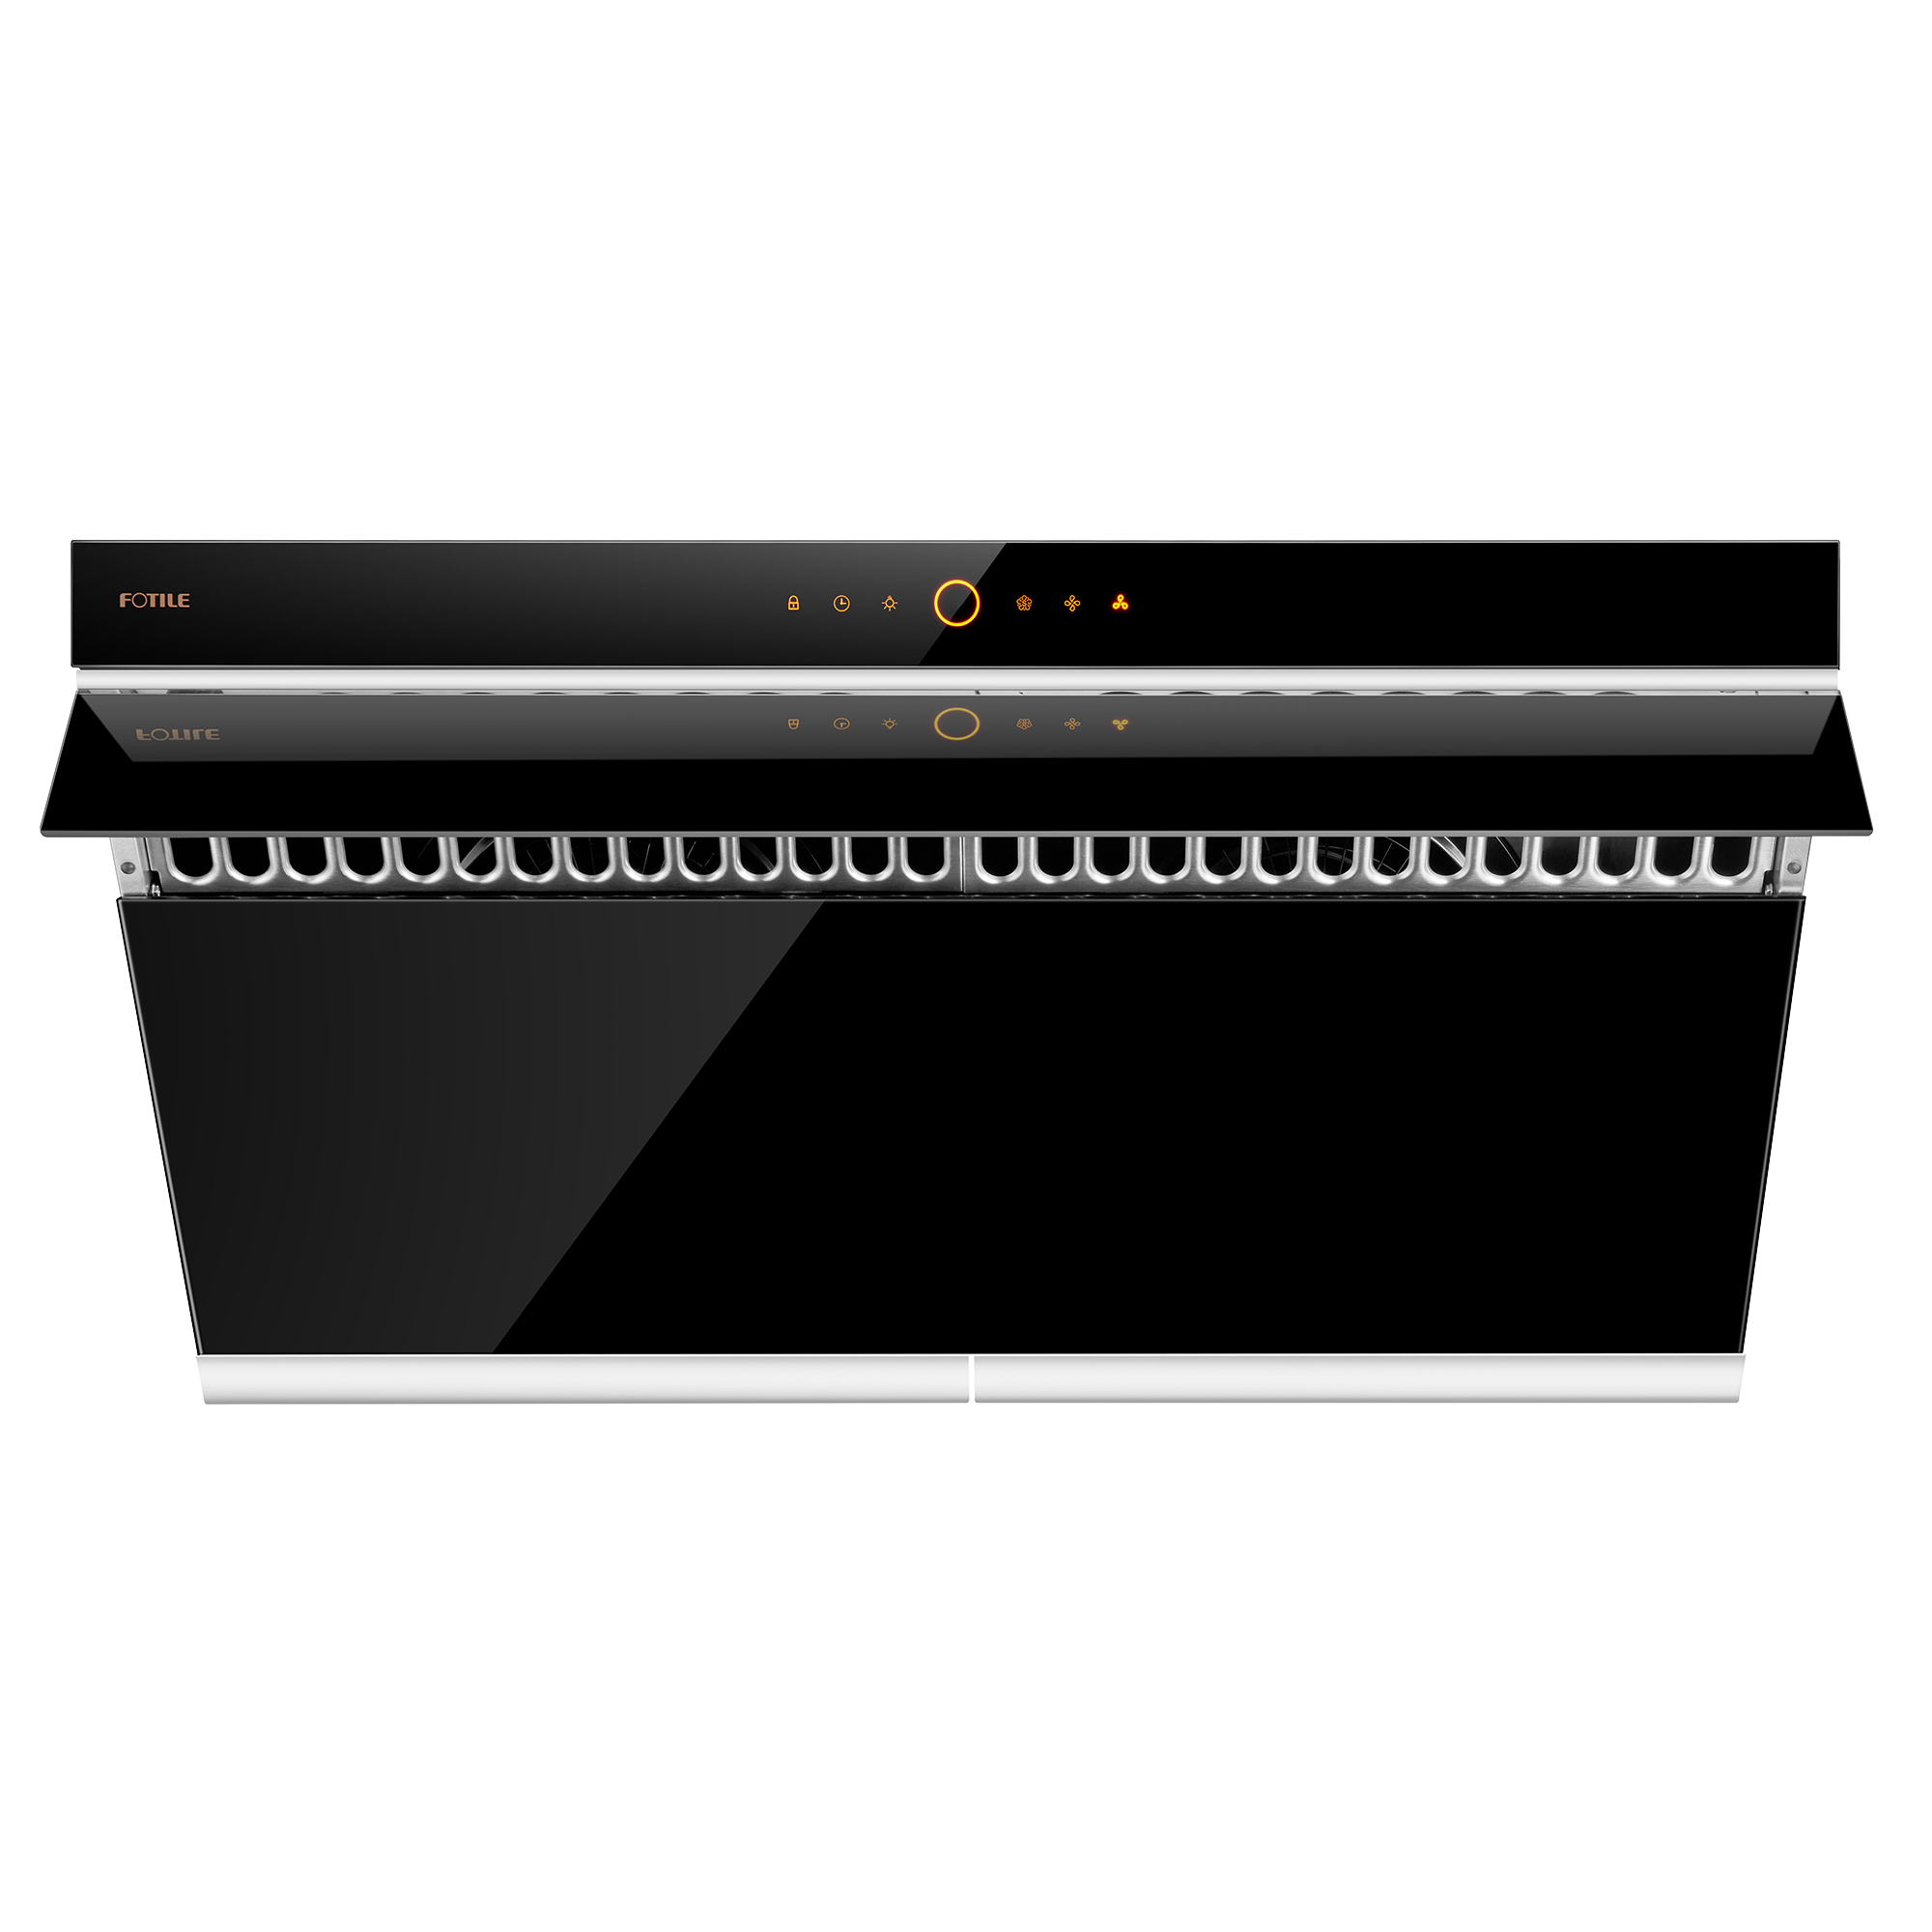 FOTILE JQG7501 30 Wall Mount Range Hood with 510 CFM Blower and 3 Fan Speeds - Onyx Black Tempered Glass